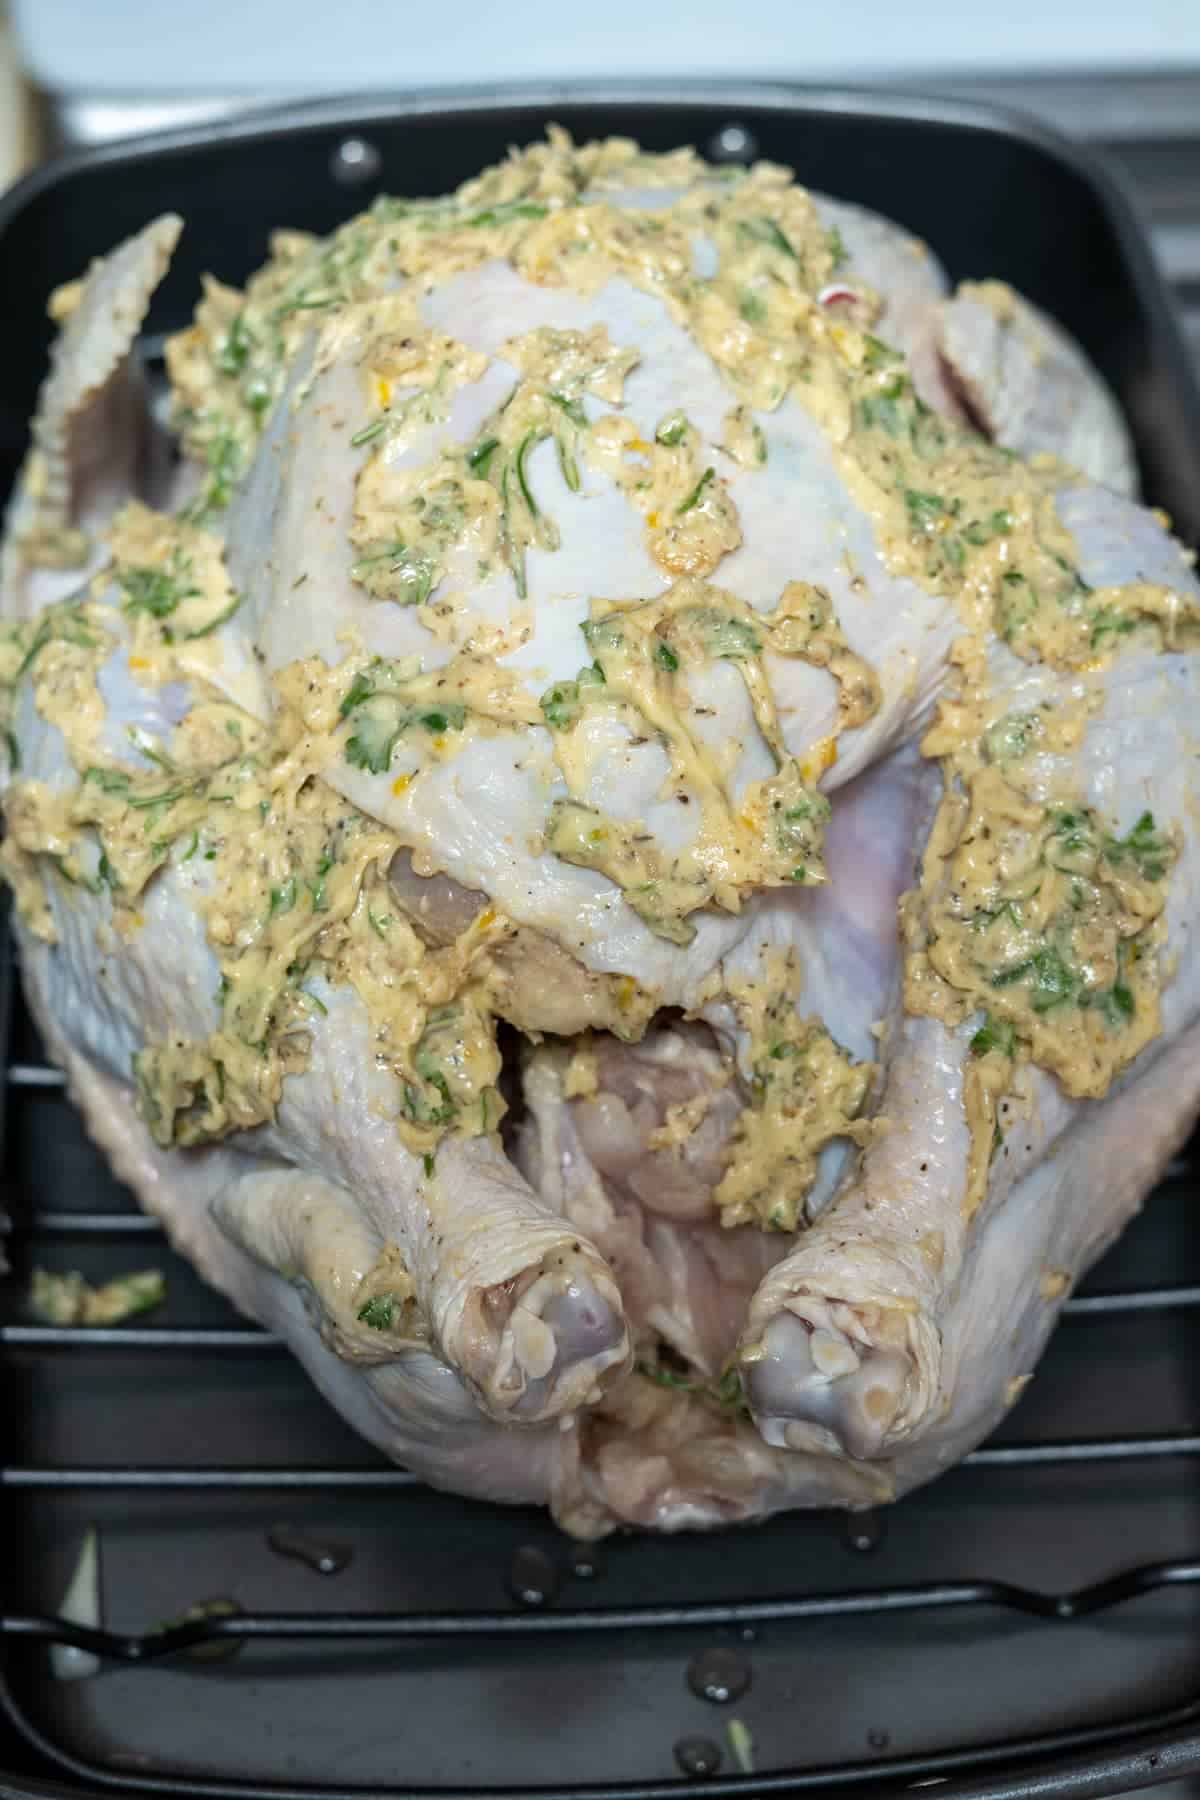 butter rubbed into turkey